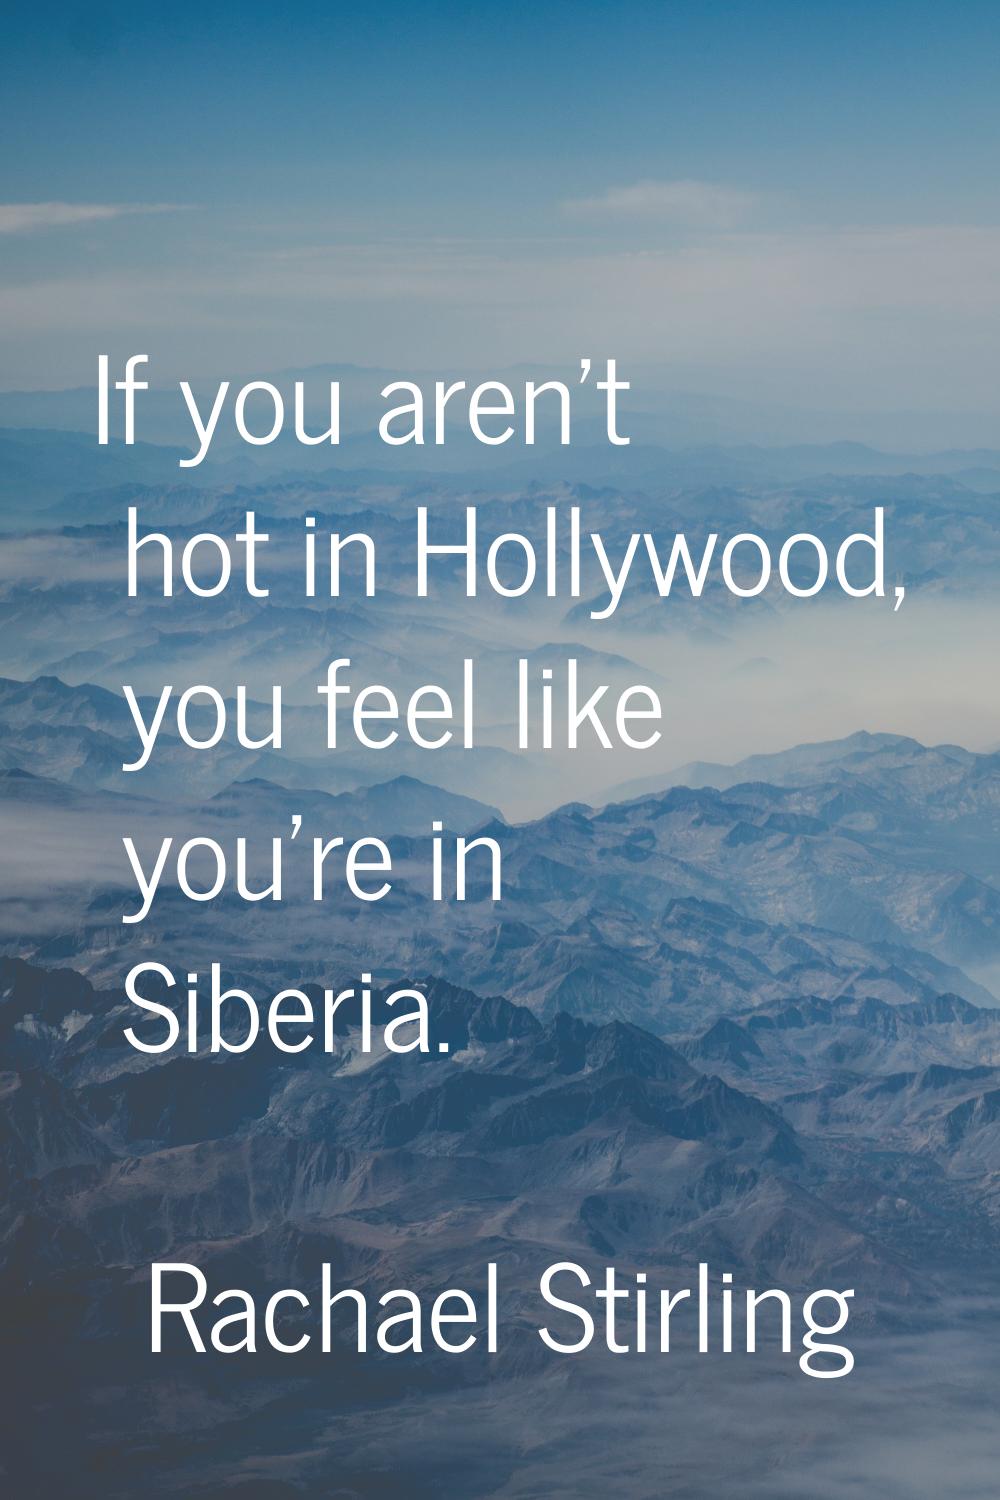 If you aren't hot in Hollywood, you feel like you're in Siberia.